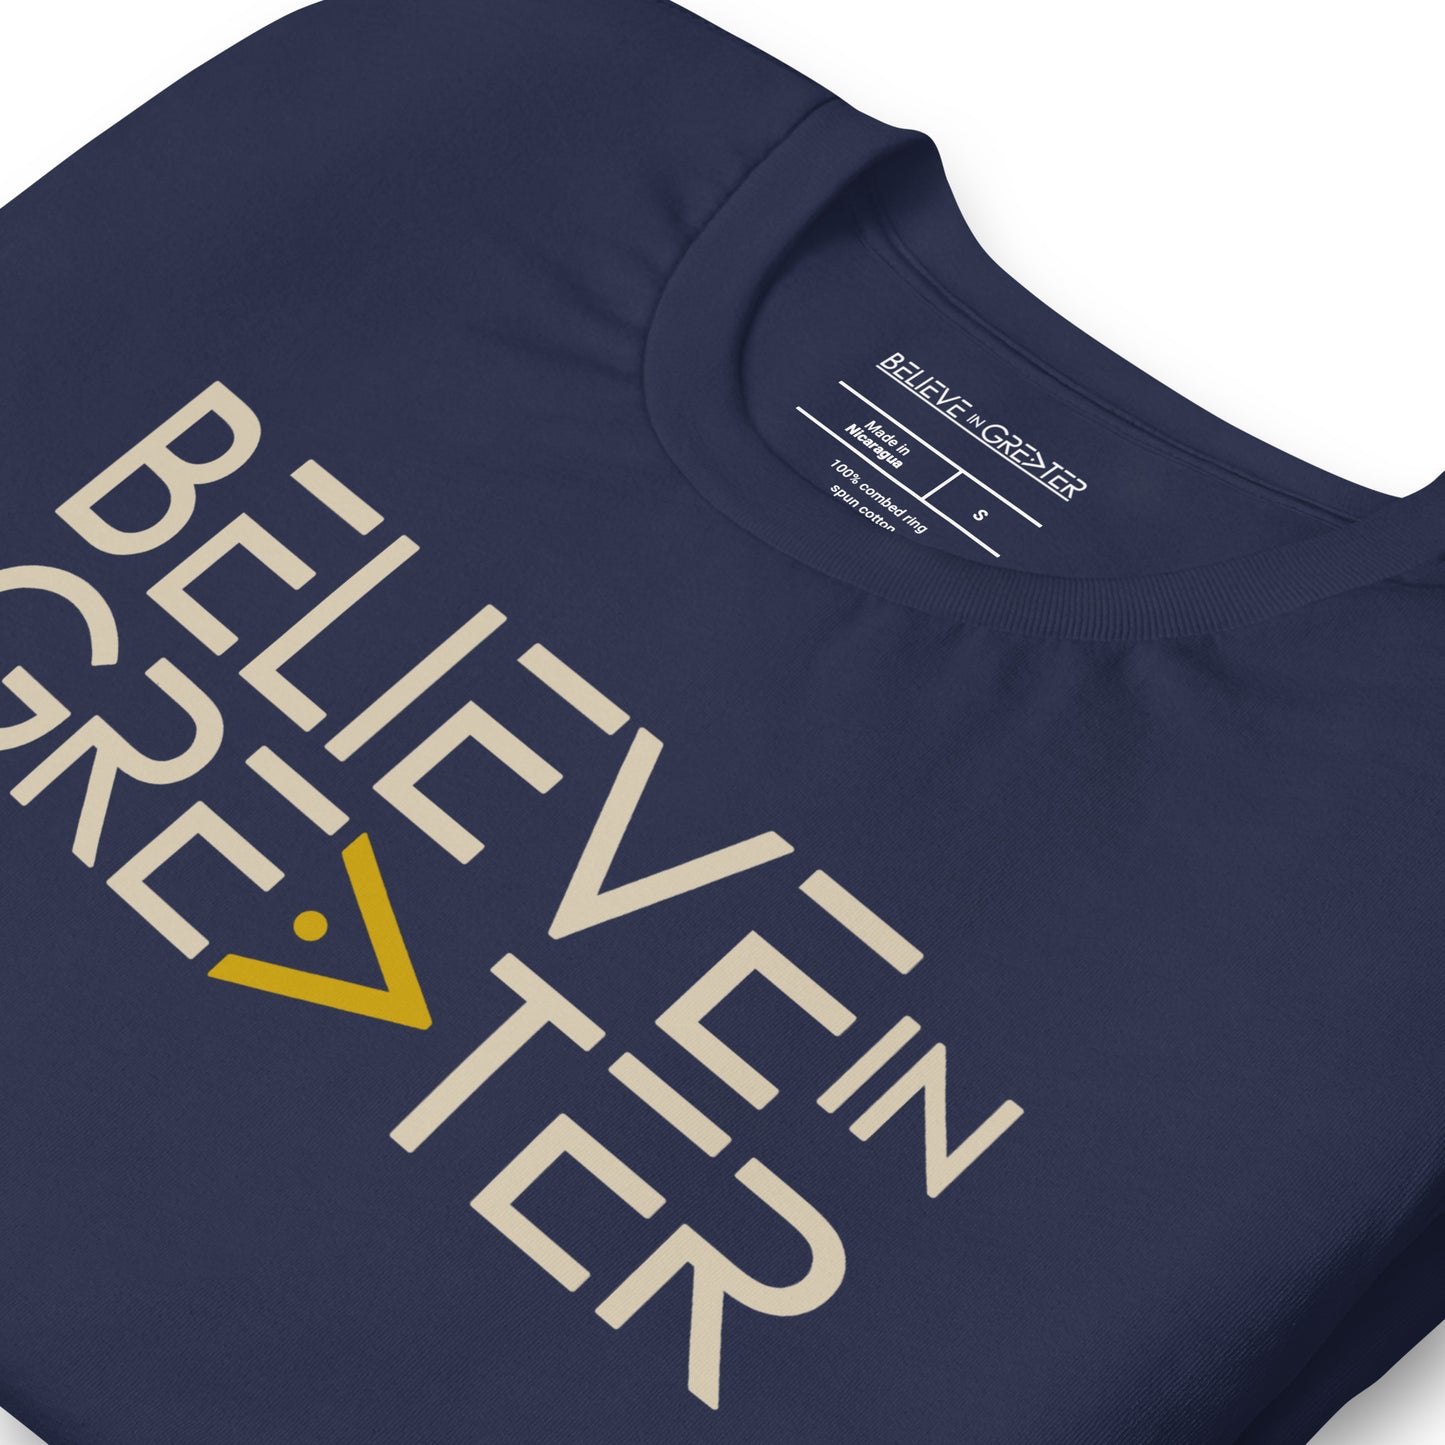 Believe in Greater Navy and Khaki Unisex Tee